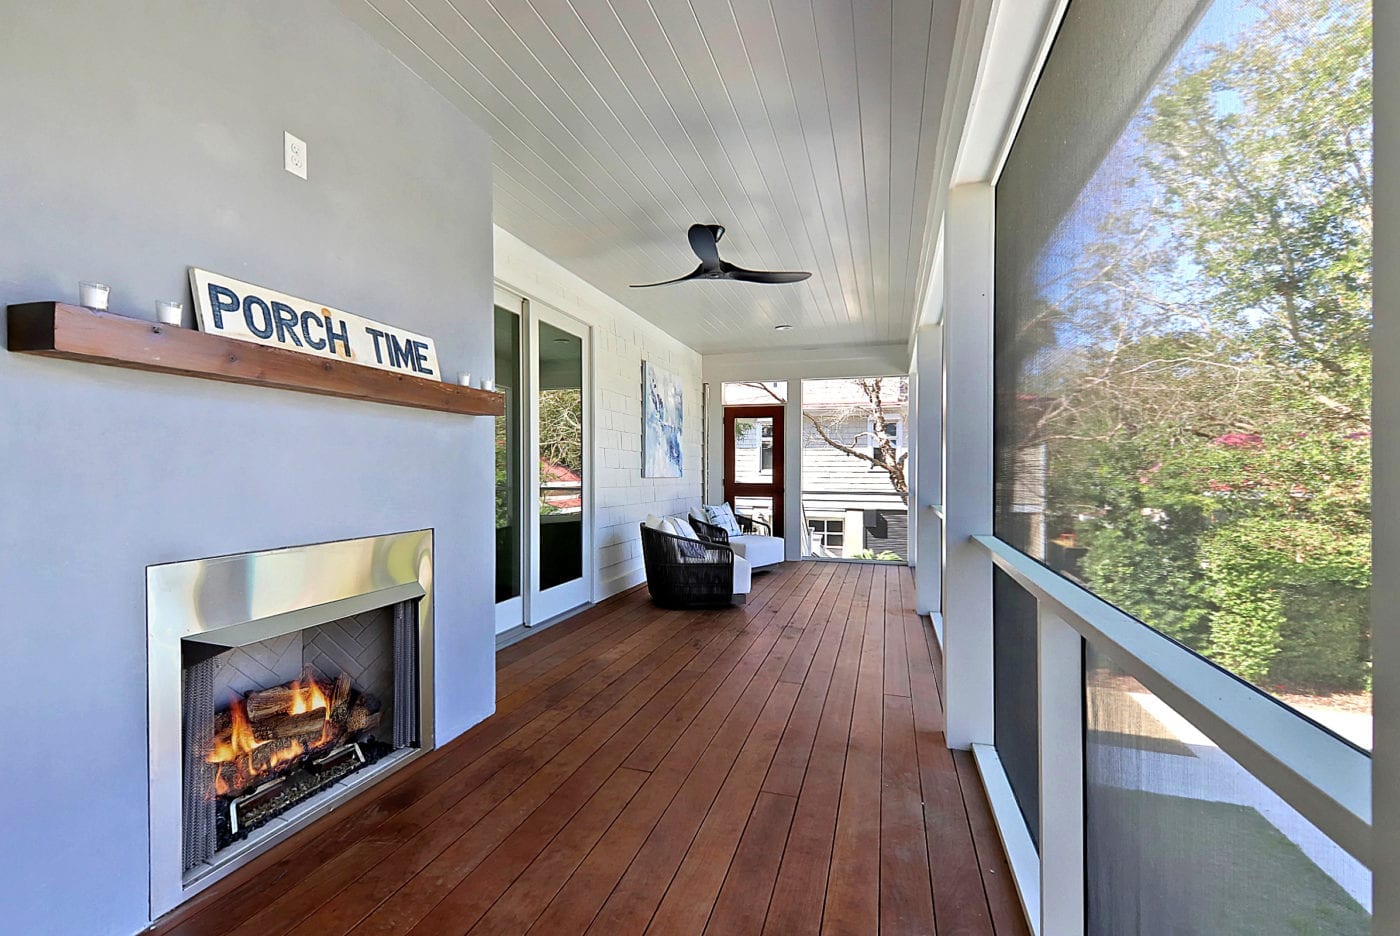 How To Keep Screened Porch Warm In Winter